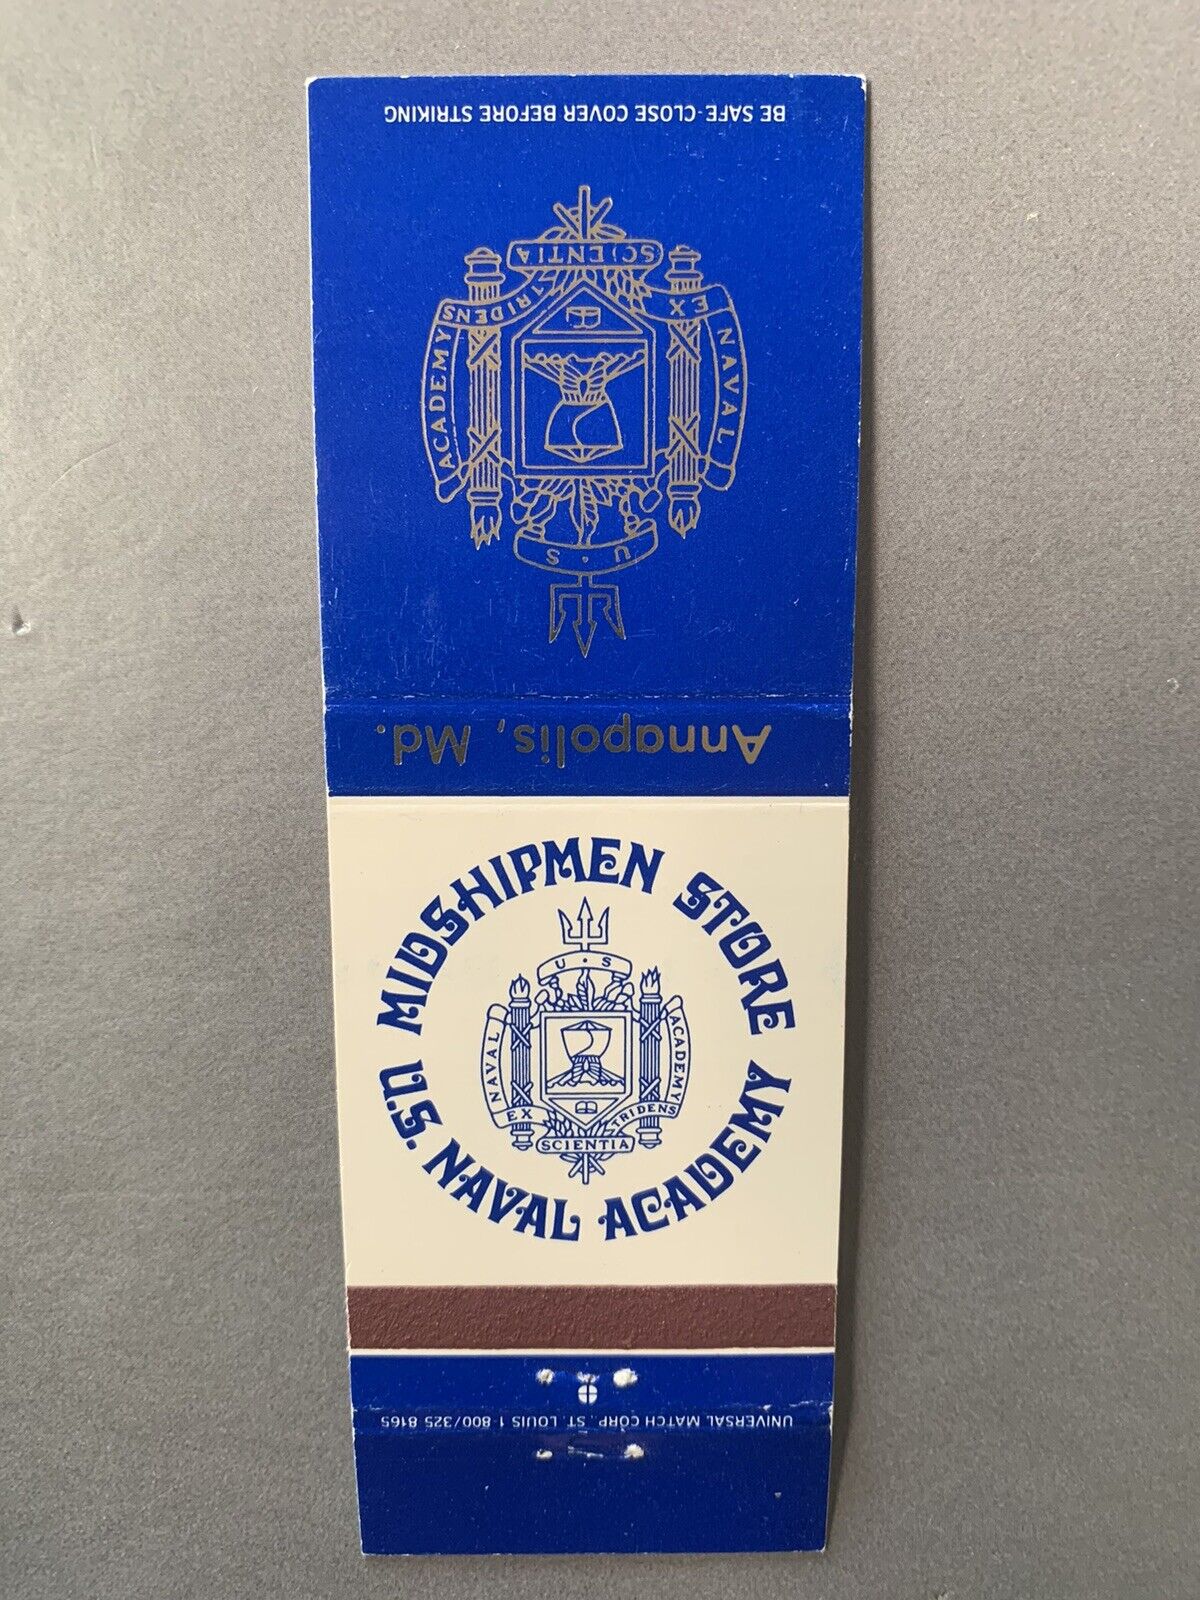 Vintage U.S. Naval Academy Midshipmen Store Annapolis MD Matchbook Cover 70s 80s